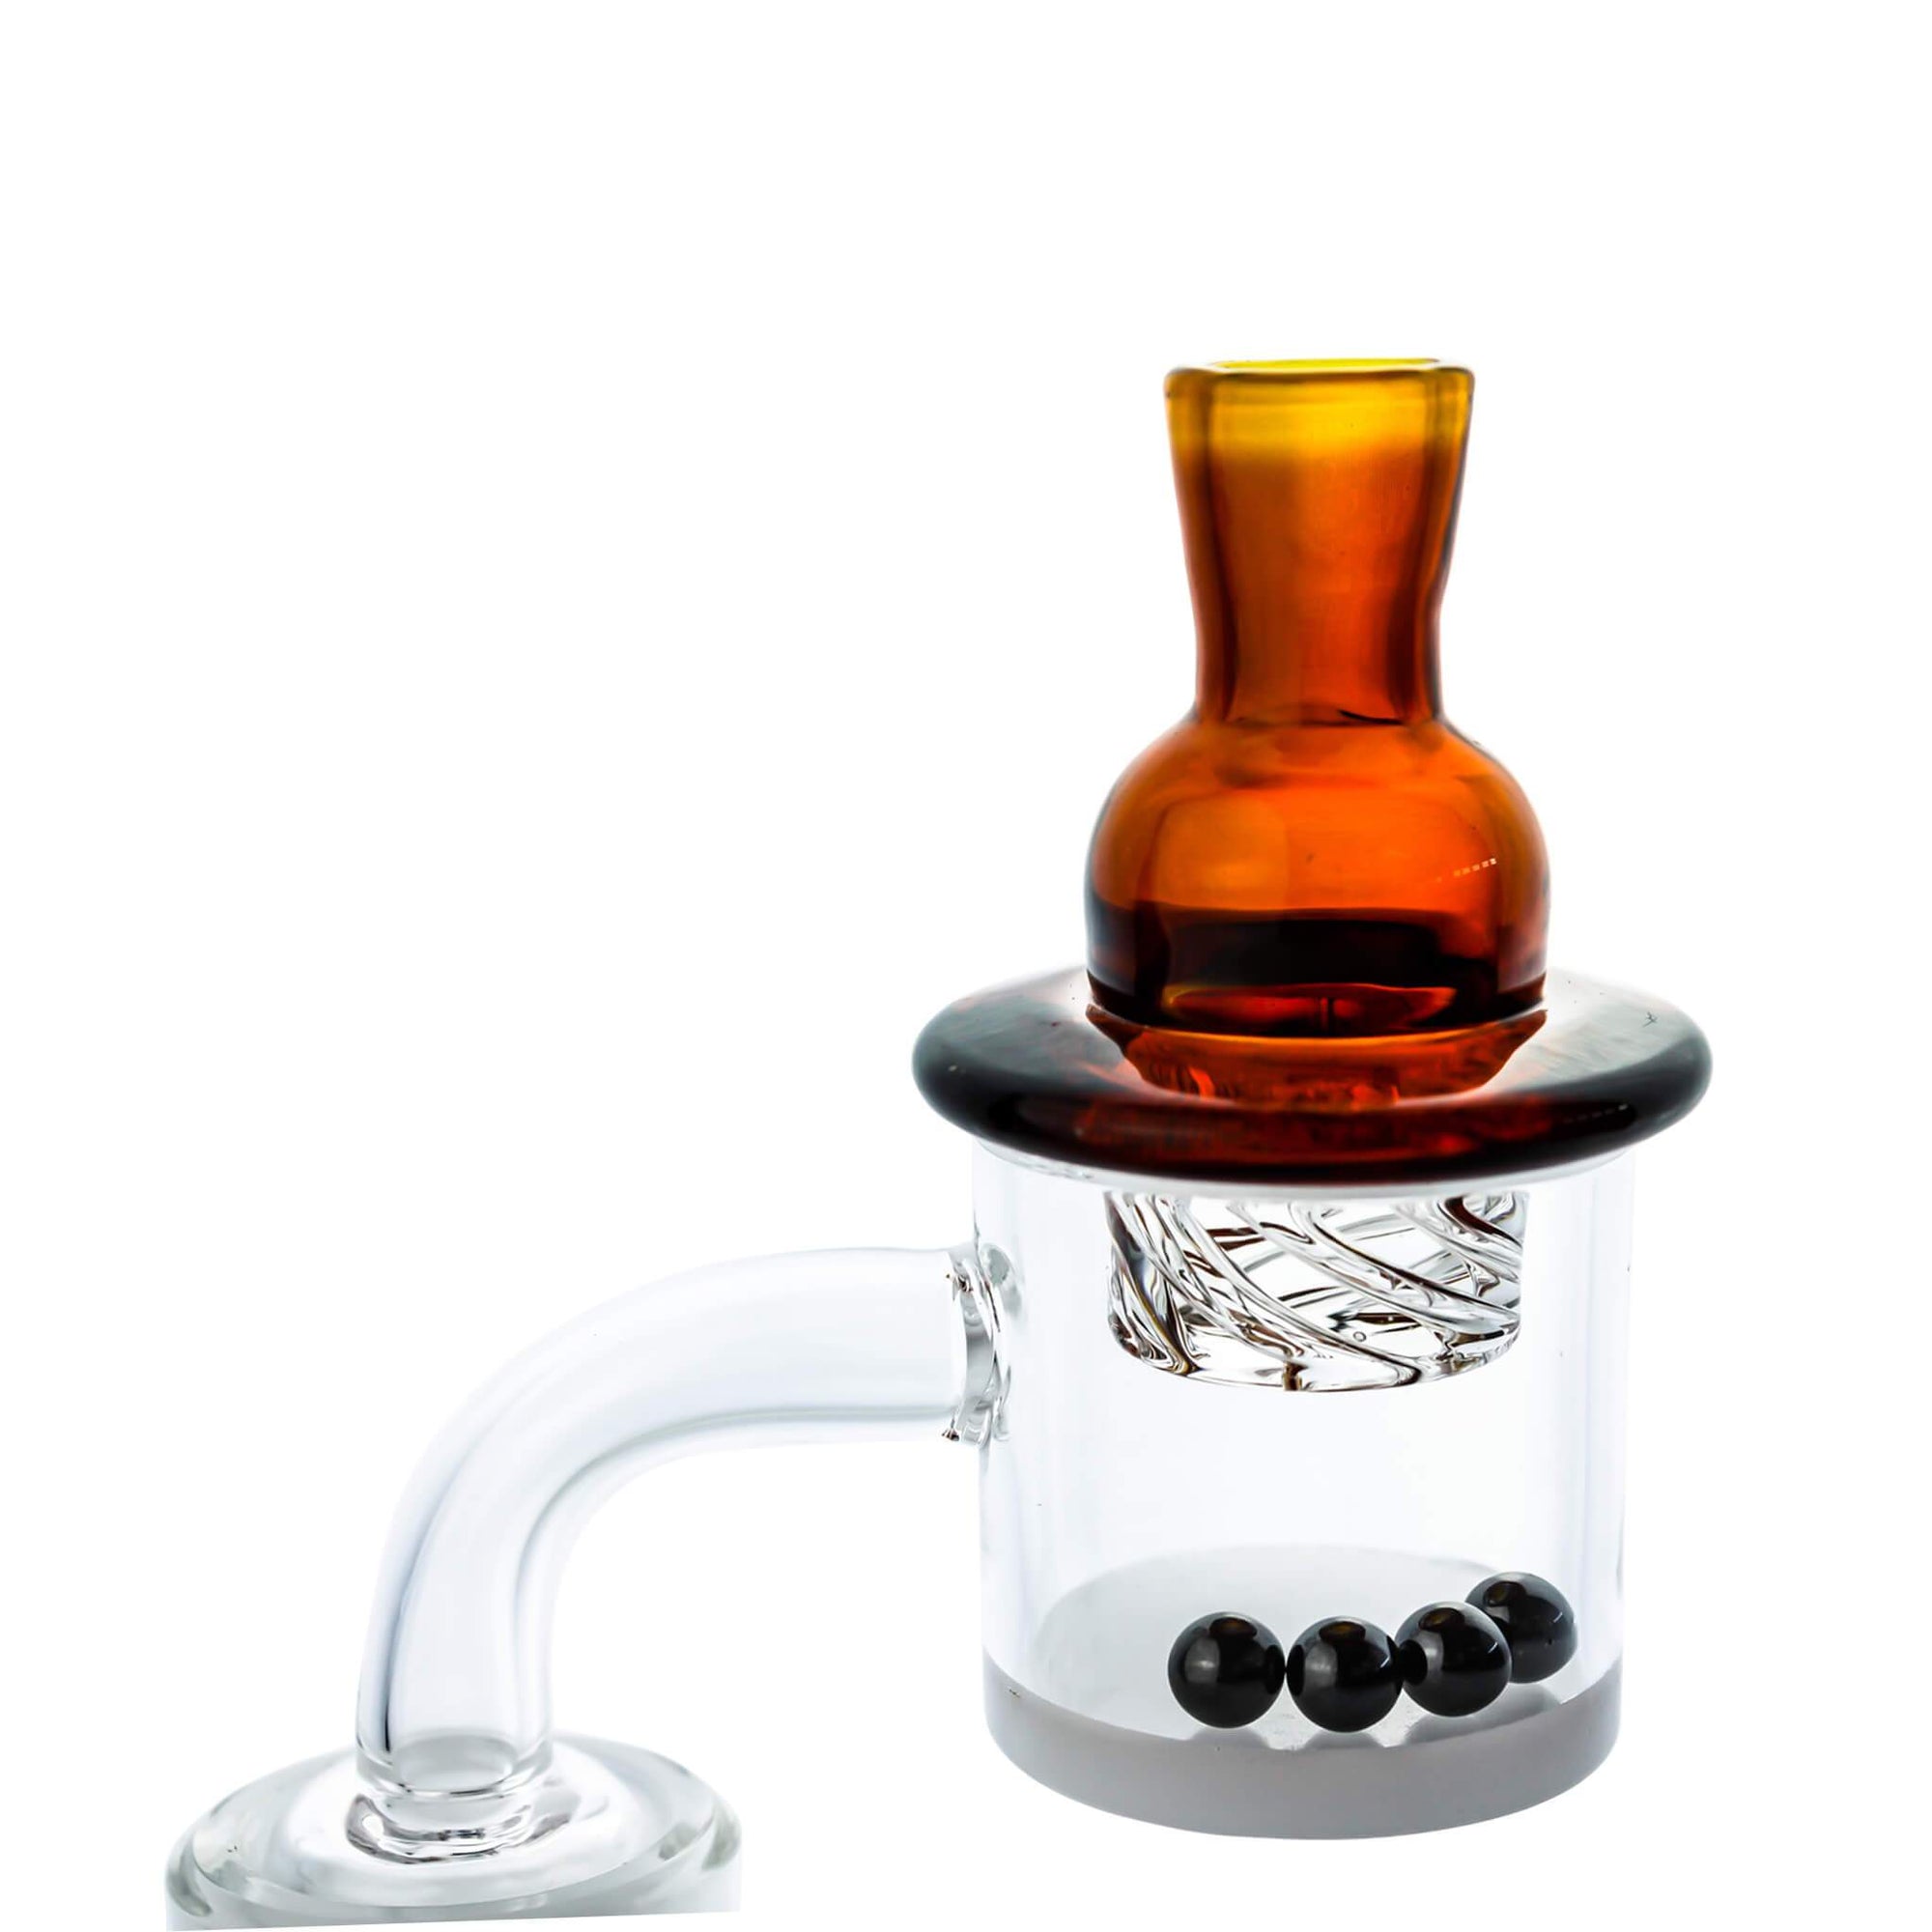 Terp Pearls, Mega Cyclone Spinner Carb Cap, 30mm Quartz Banger Combo | Combo Pack View-Amber | DW